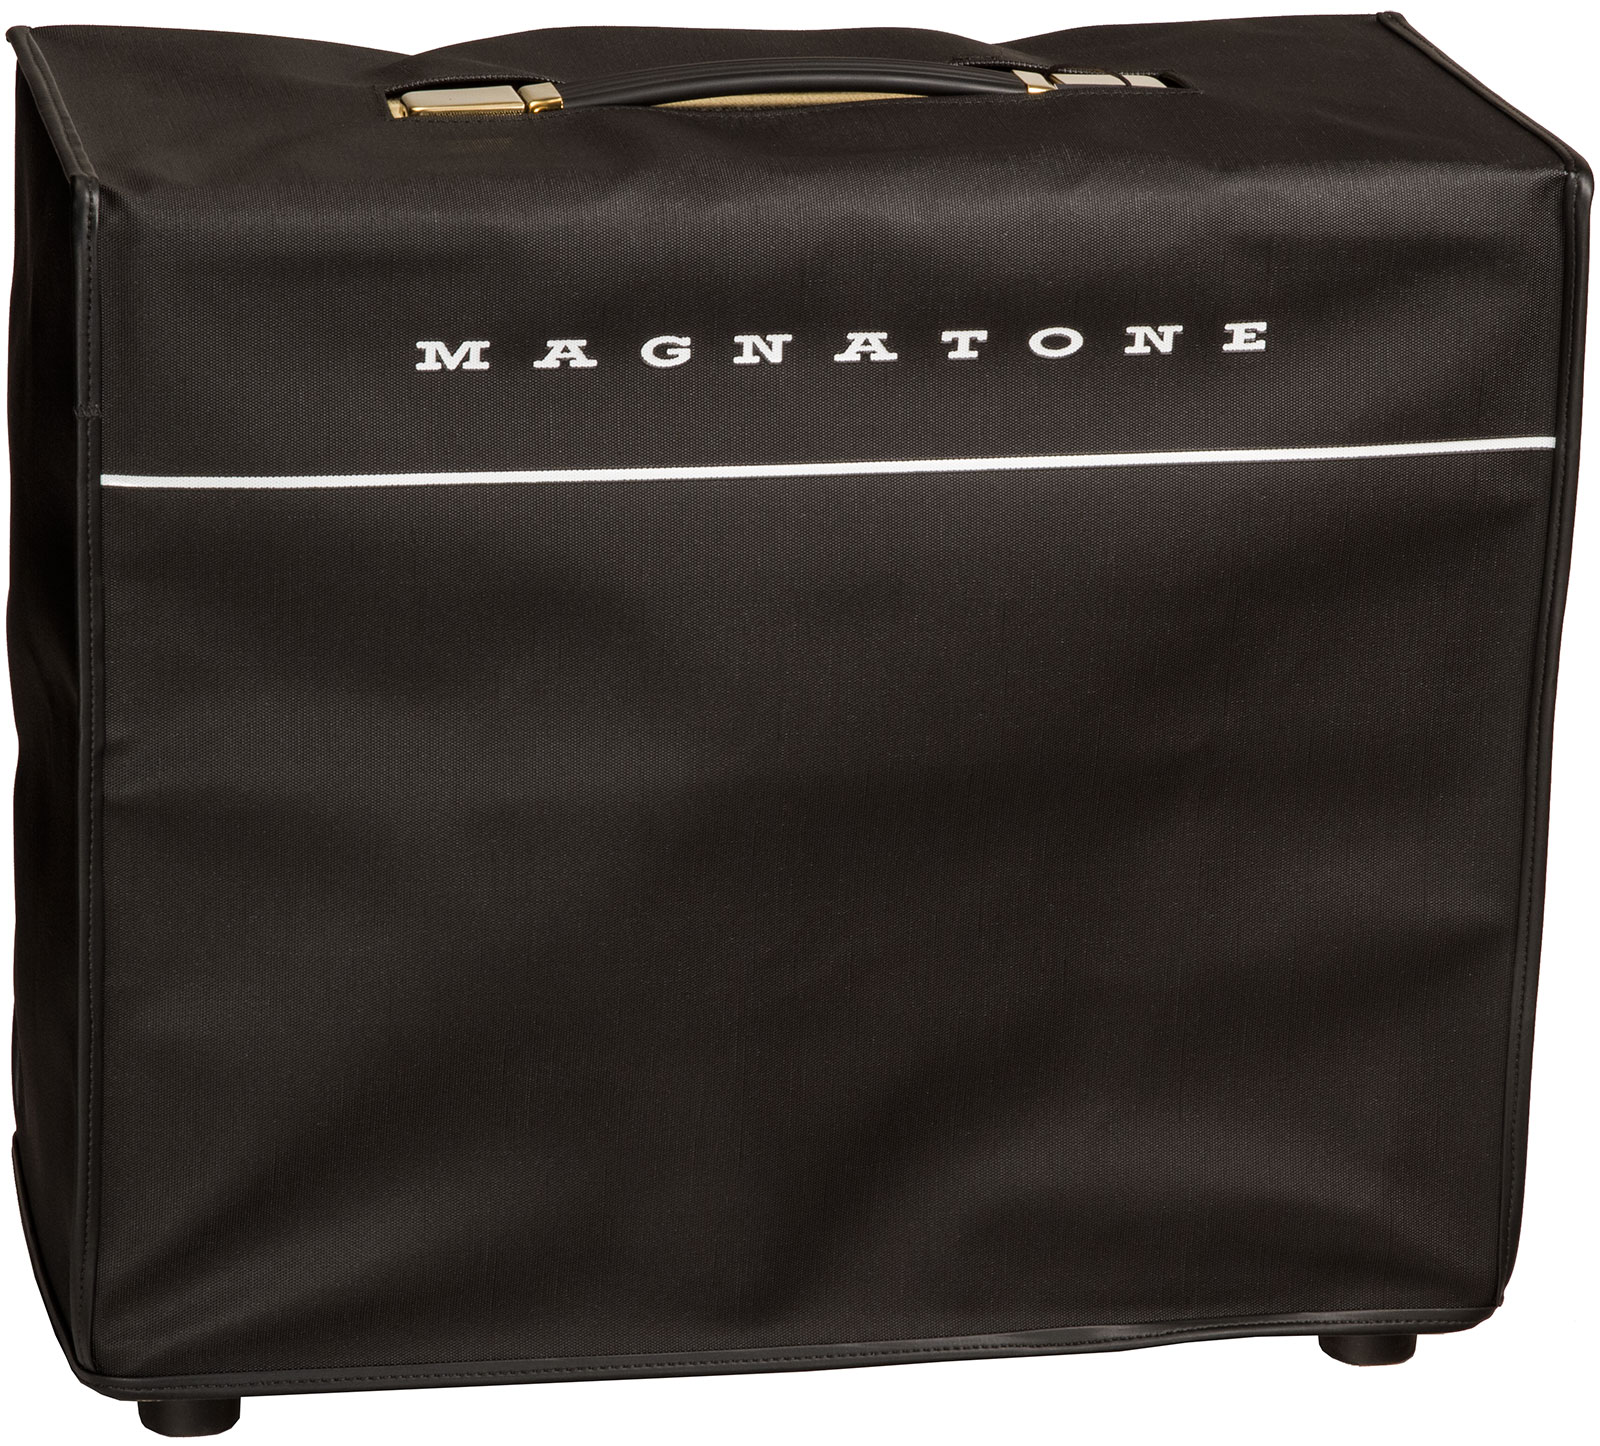 Magnatone Master Collection Super Fifteen Combo 15w 1x12 Gold - Electric guitar combo amp - Variation 3